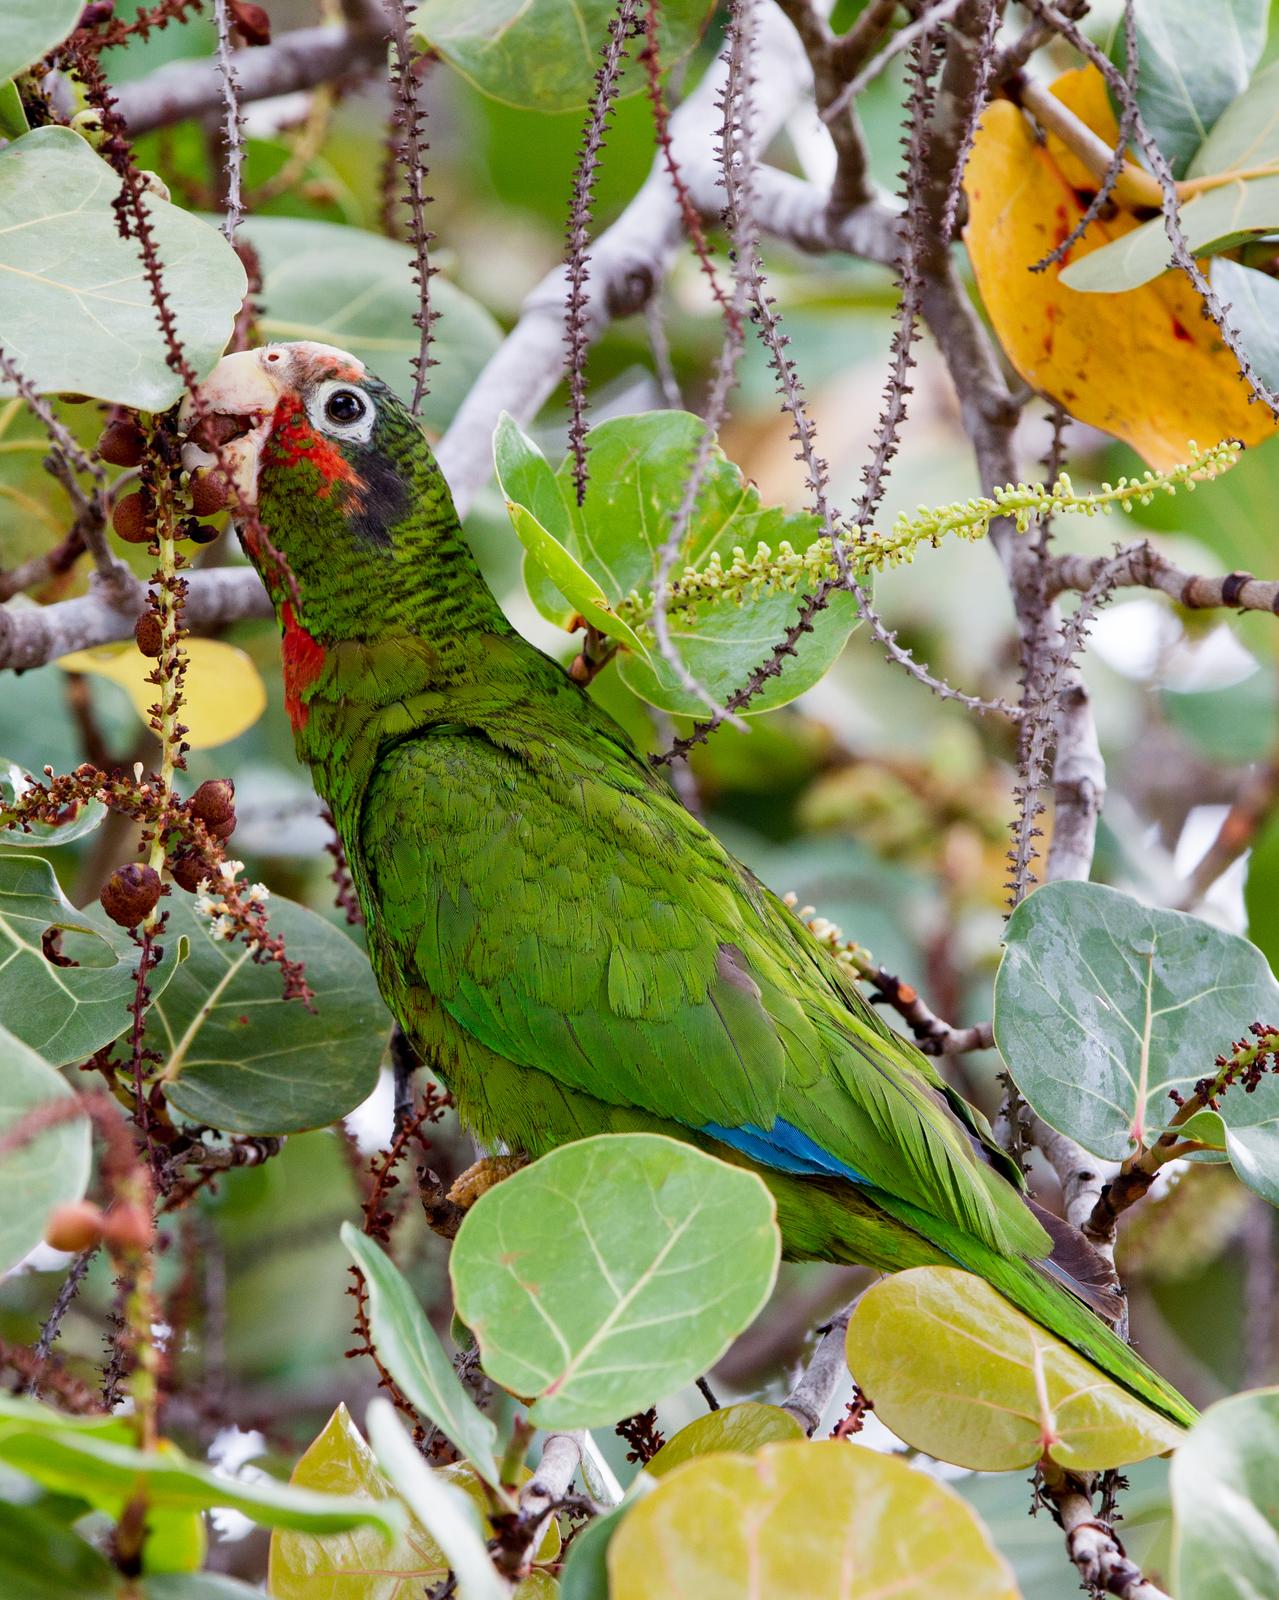 Cuban Parrot (Cayman Is.) Photo by Kevin Berkoff